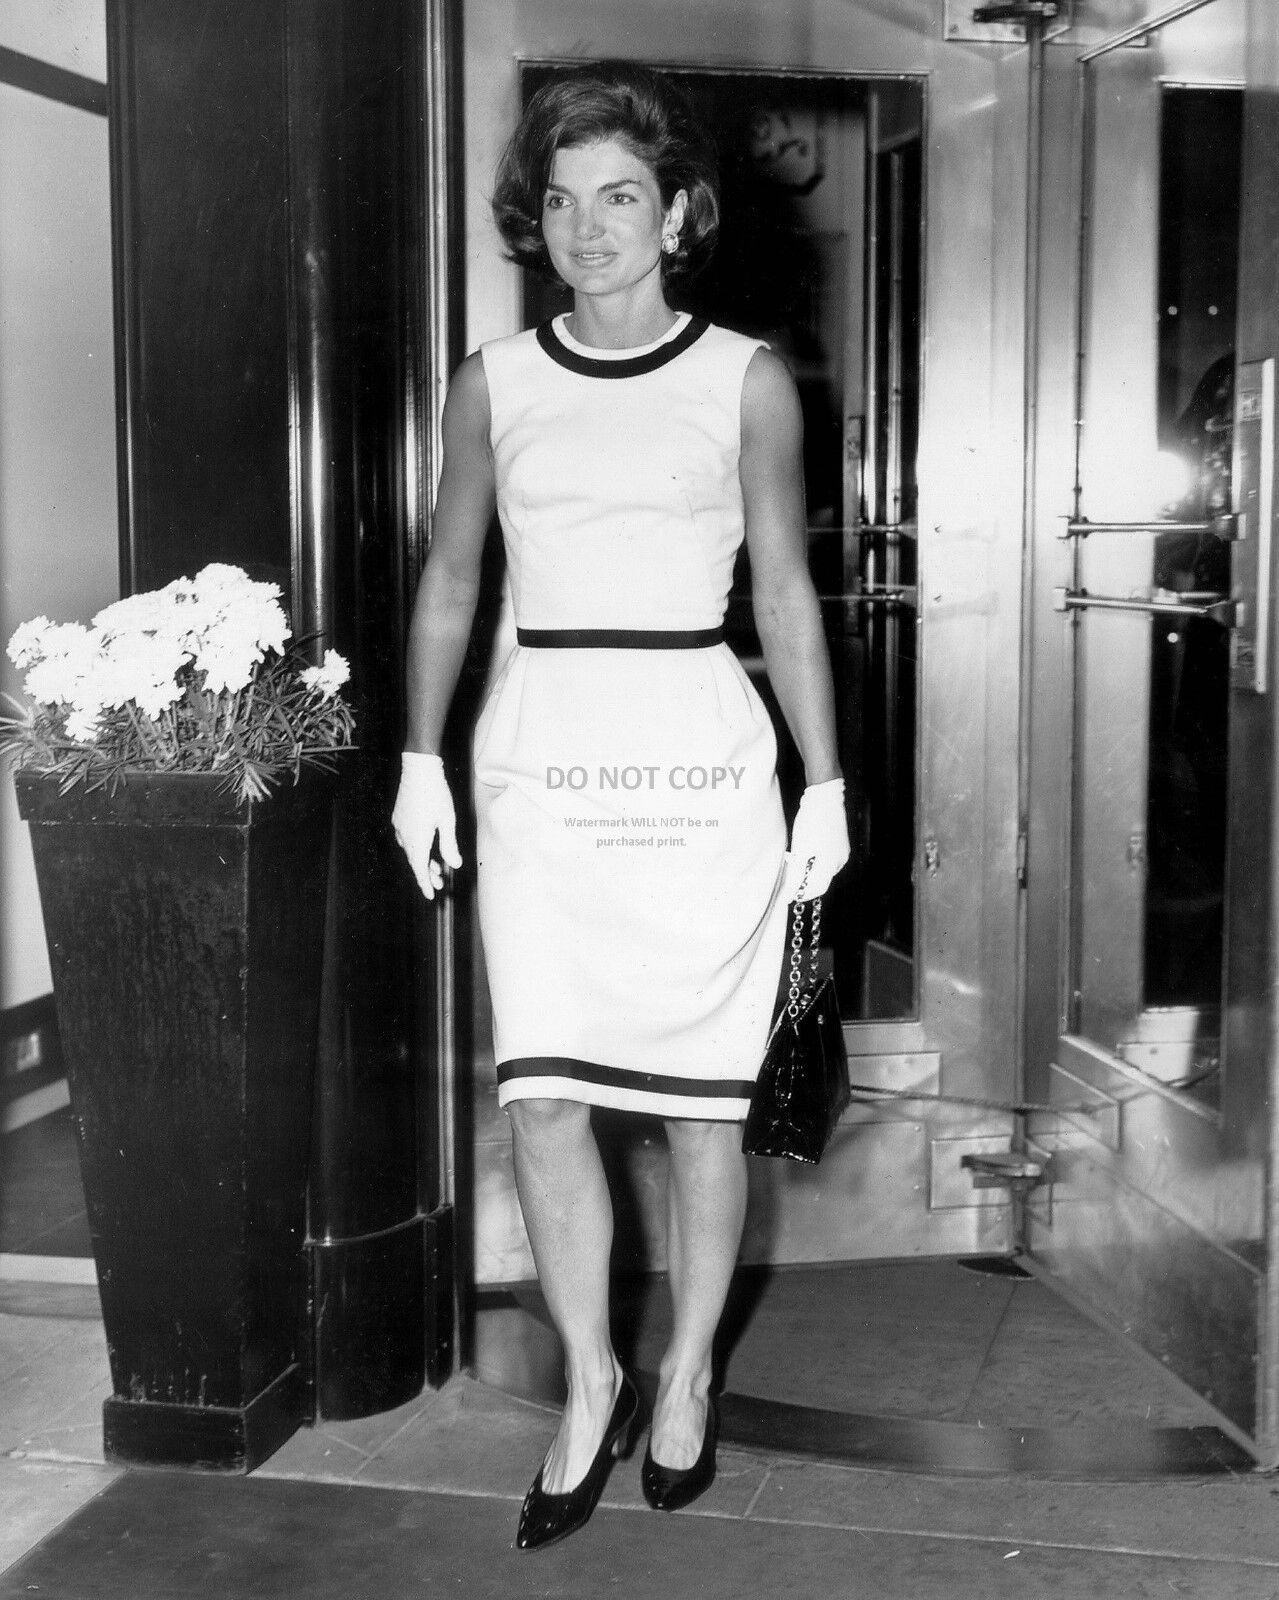 FIRST LADY JACQUELINE KENNEDY LEAVES THE CARLYLE HOTEL 1962 - 8X10 PHOTO (DA871)